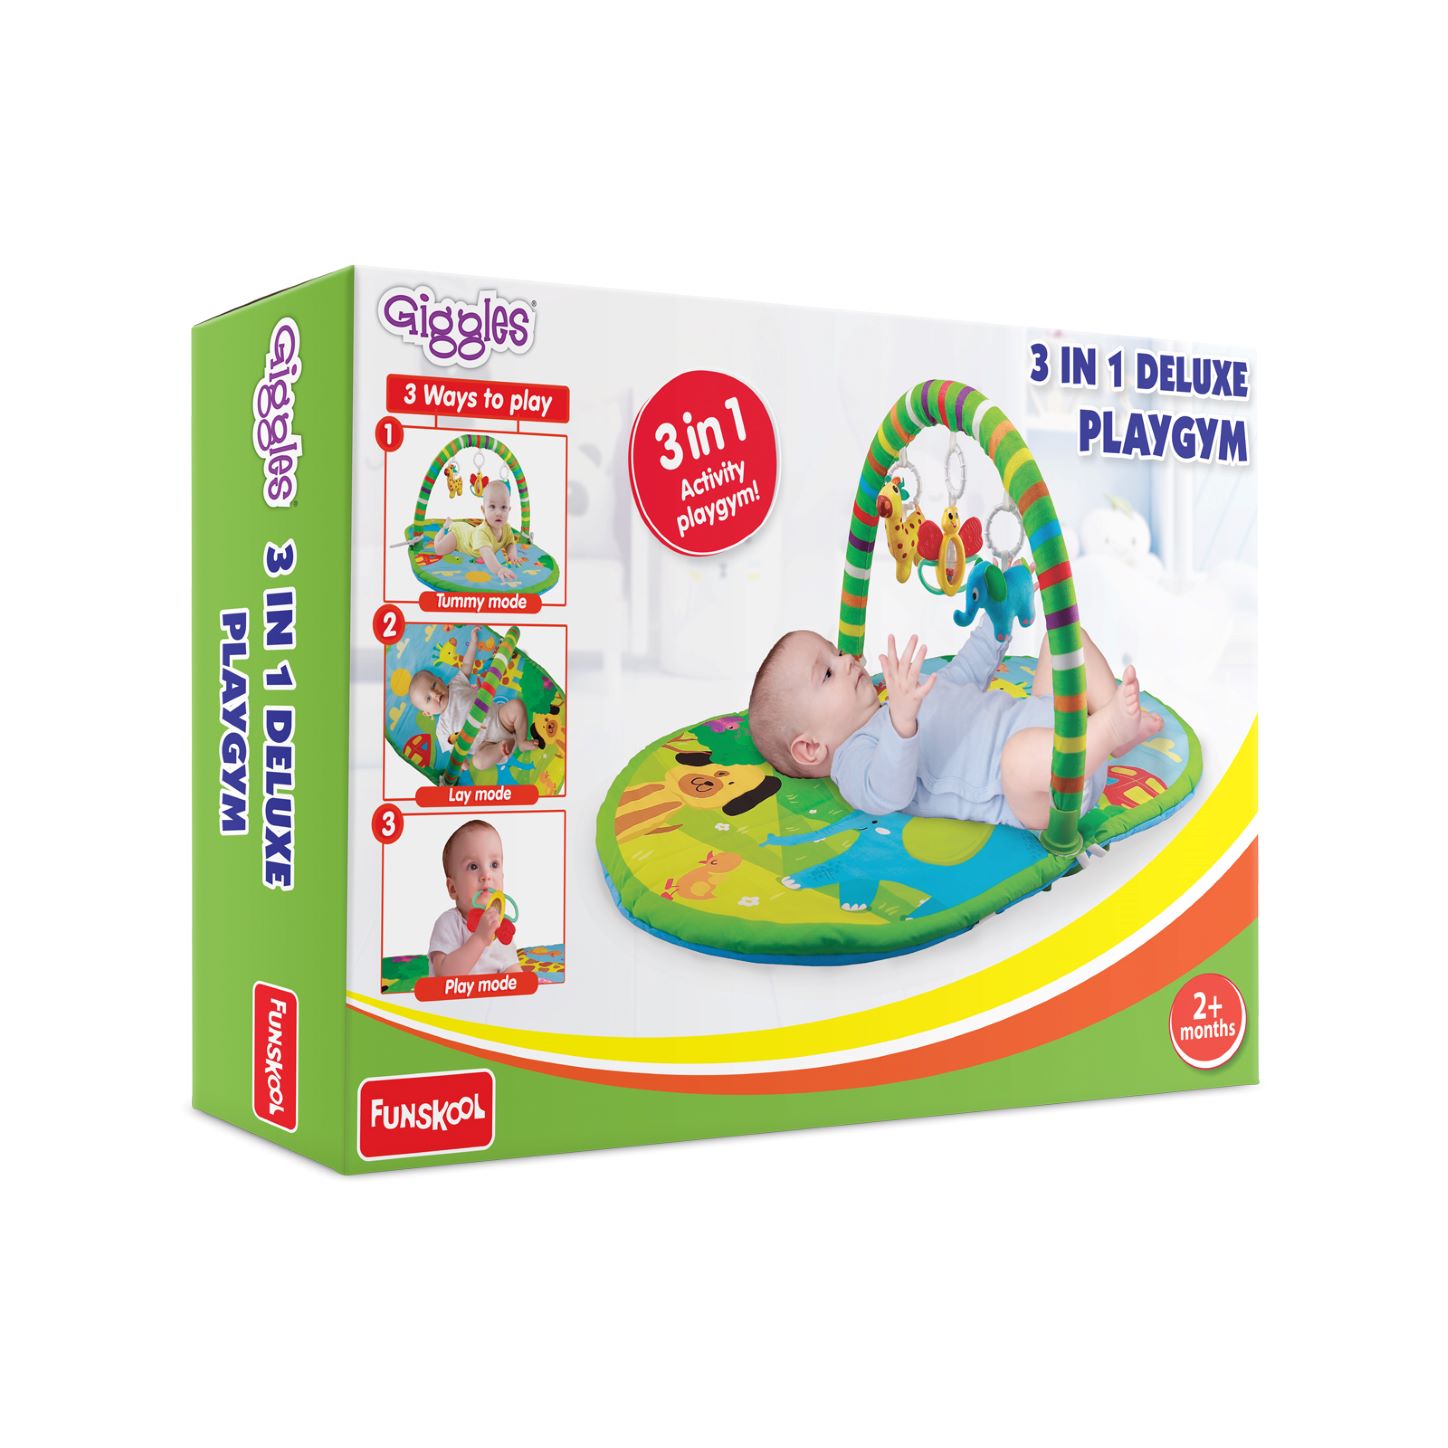 3 IN 1 DELUXE PLAYGYM